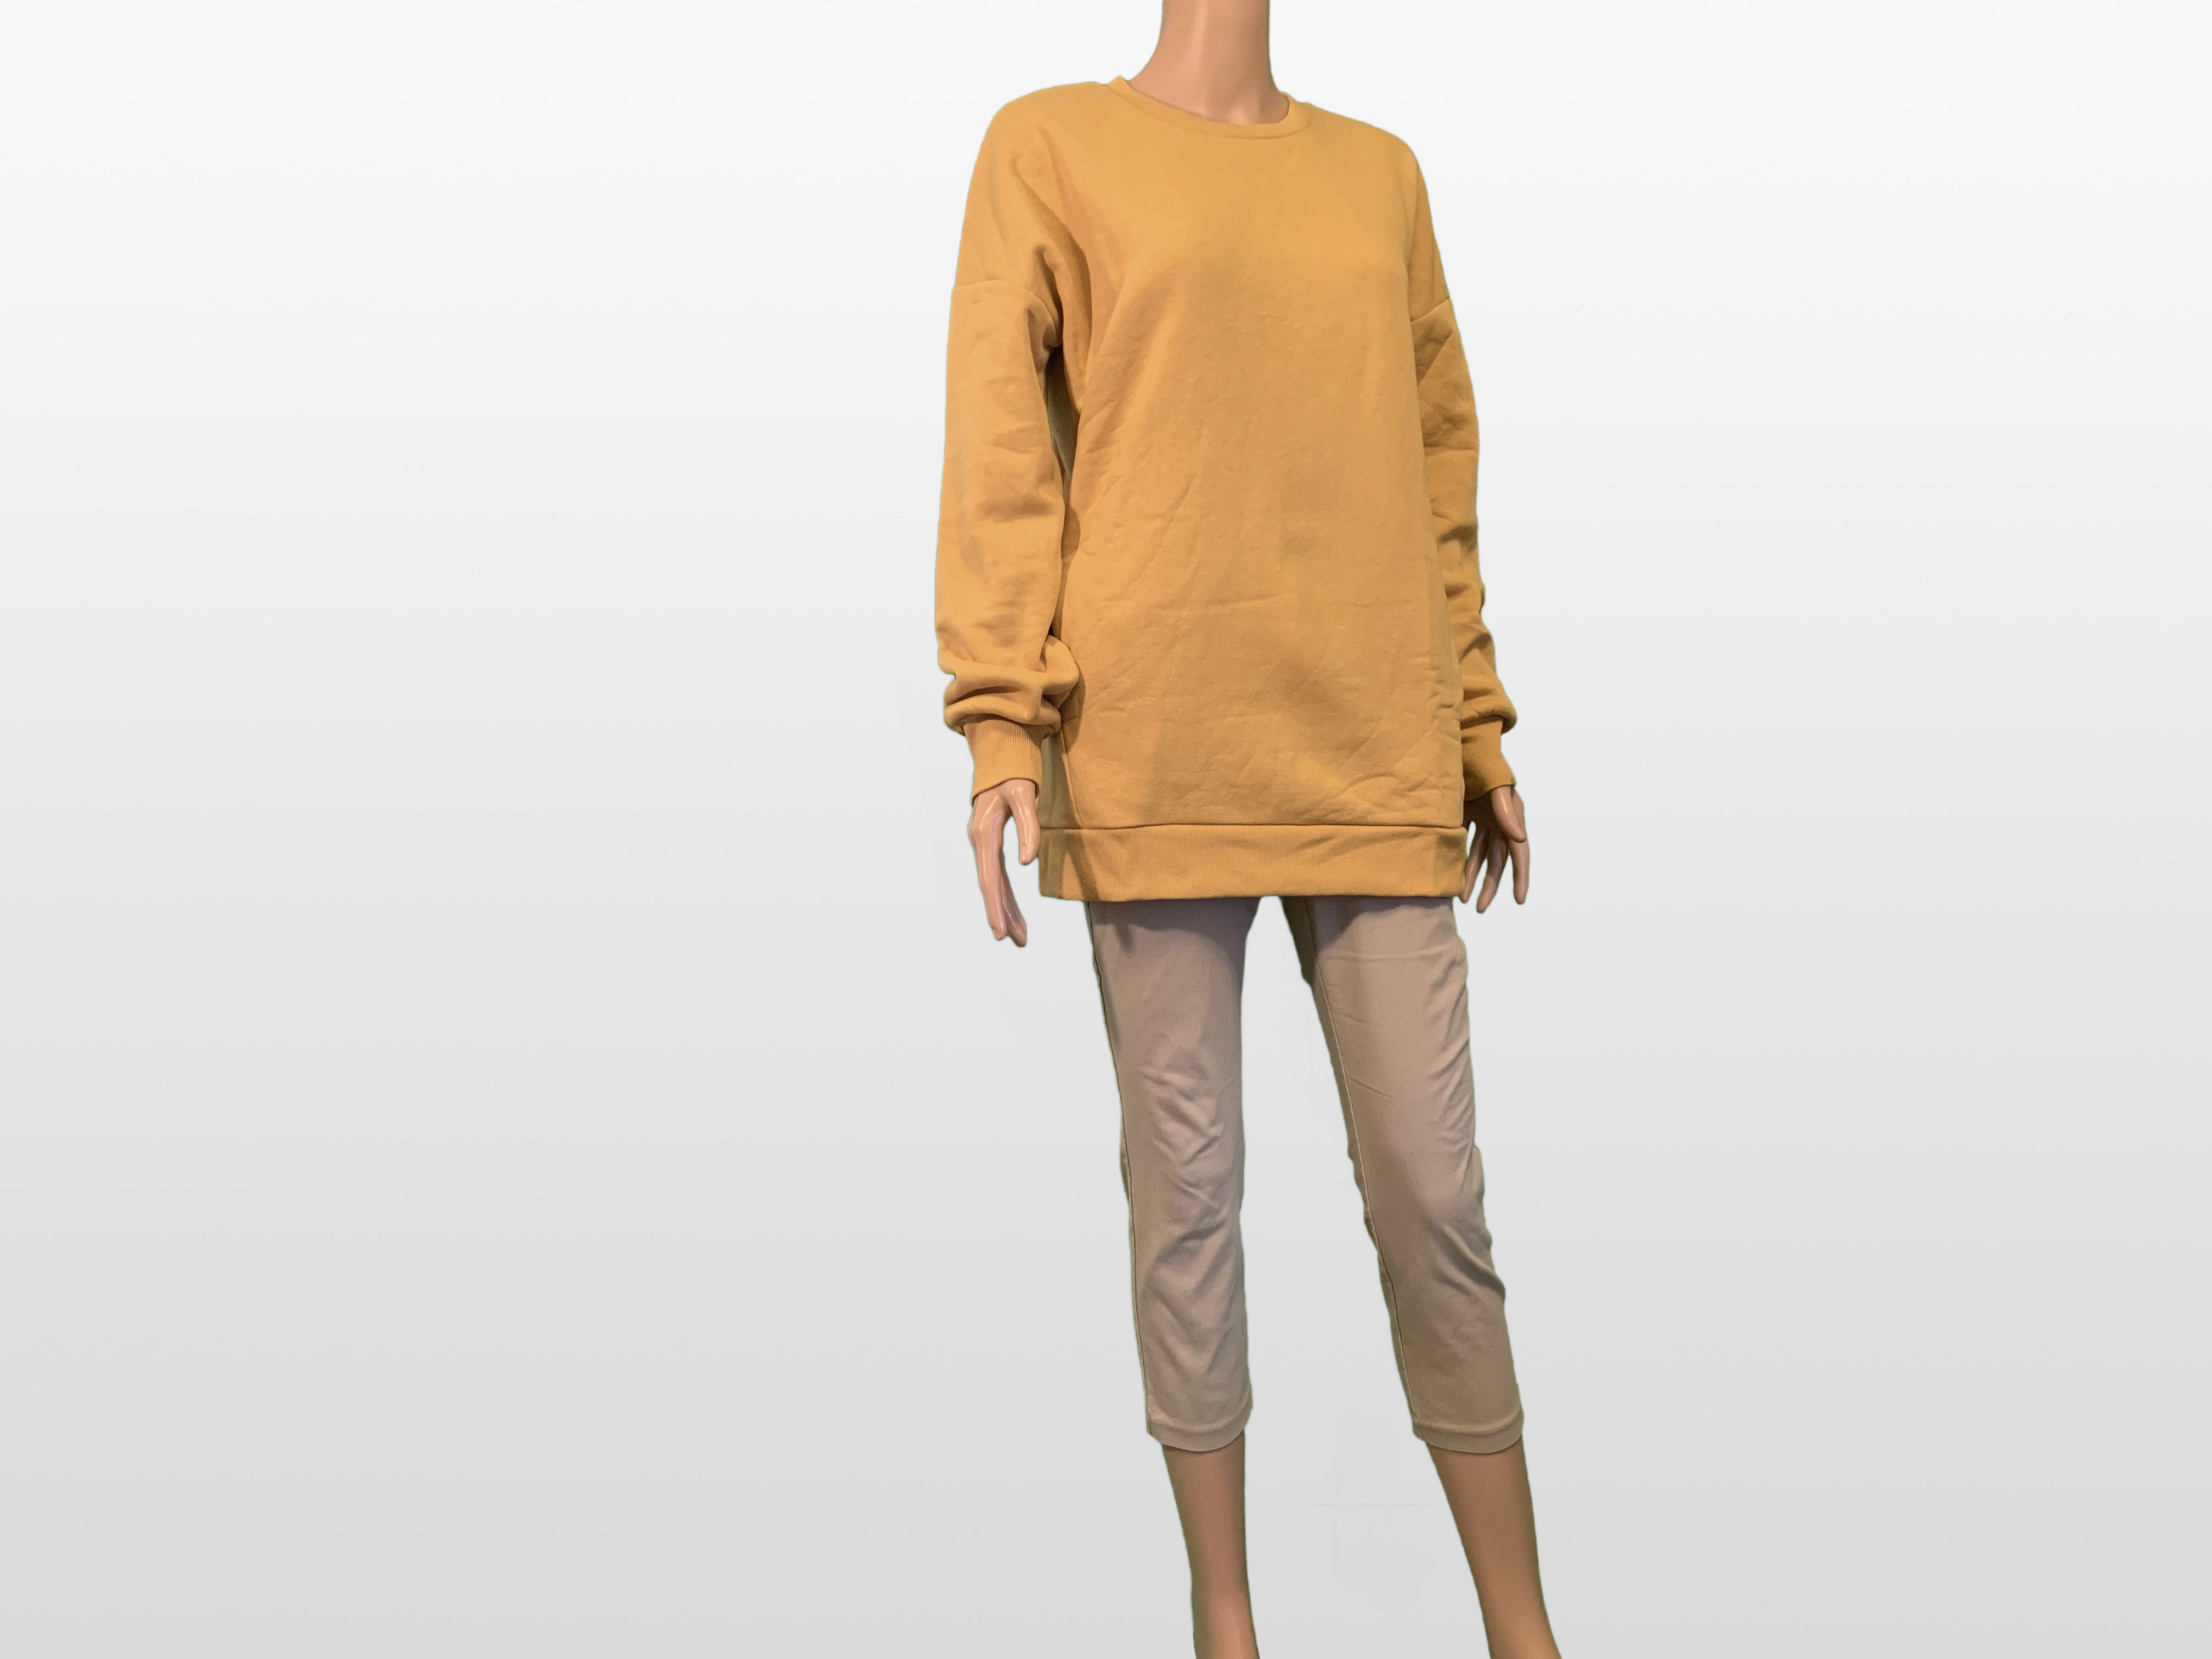 Light Mustard Sweater with Pockets